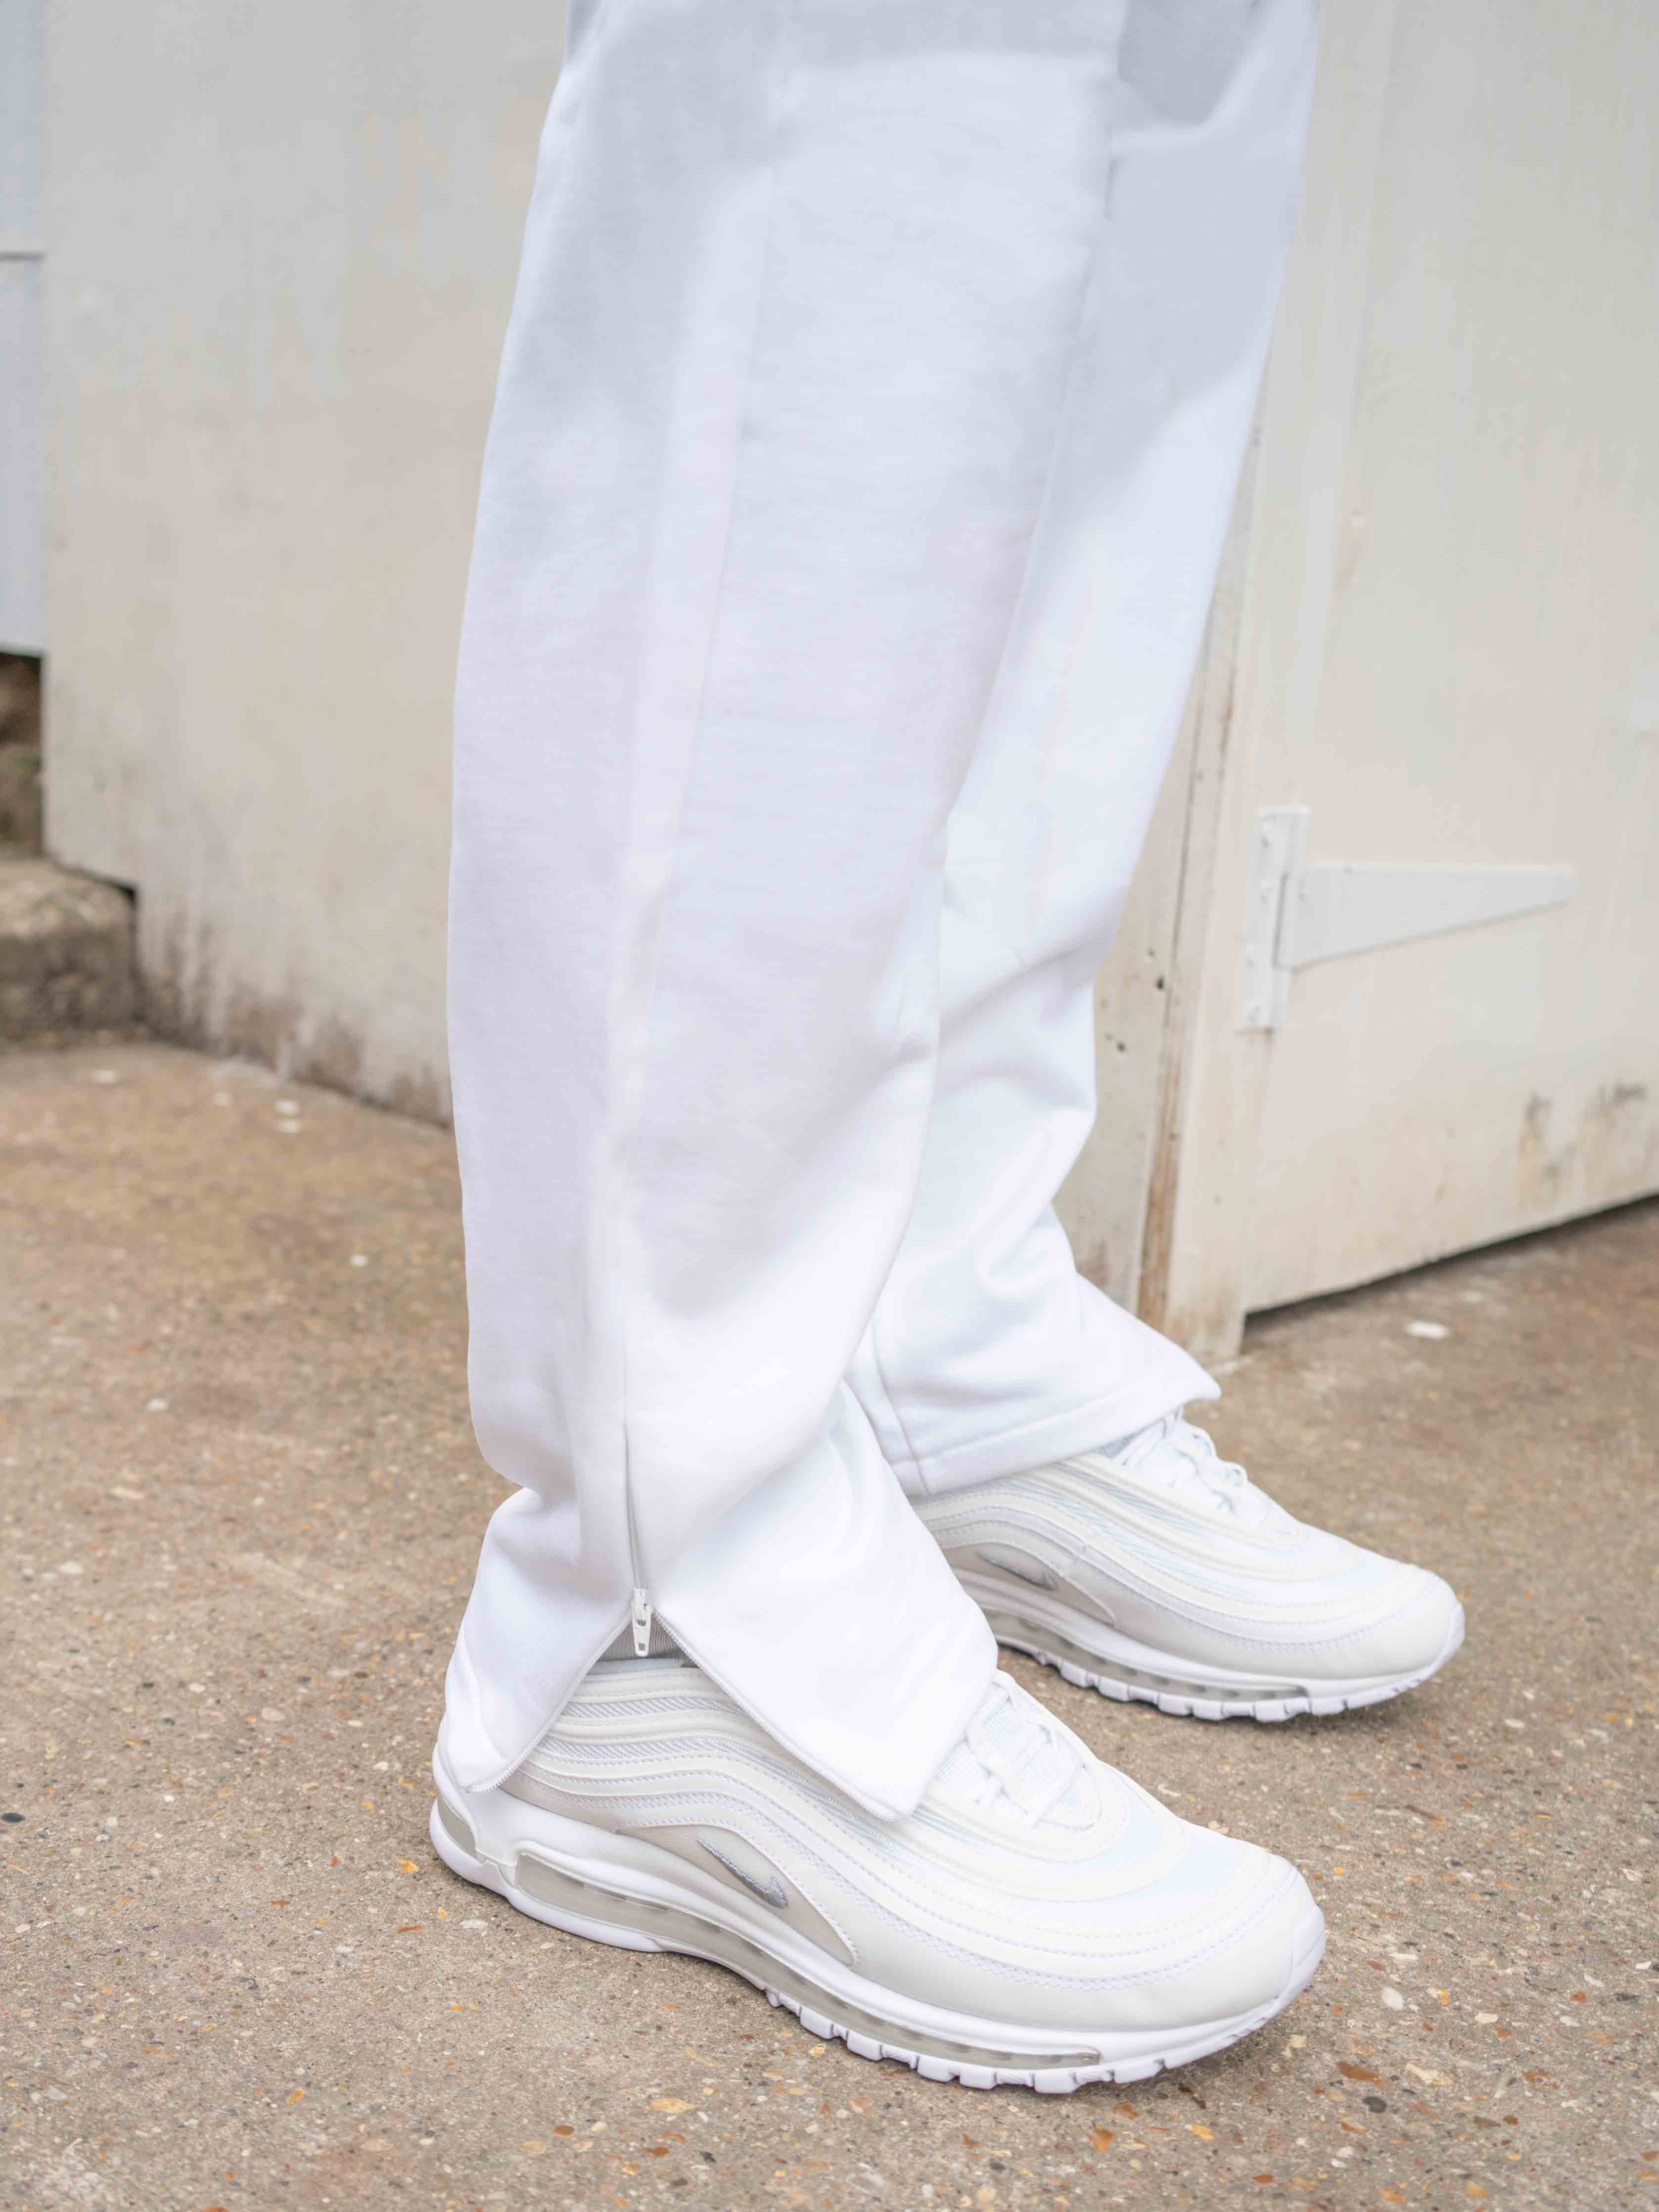 Old English Tracksuit Bottoms - White